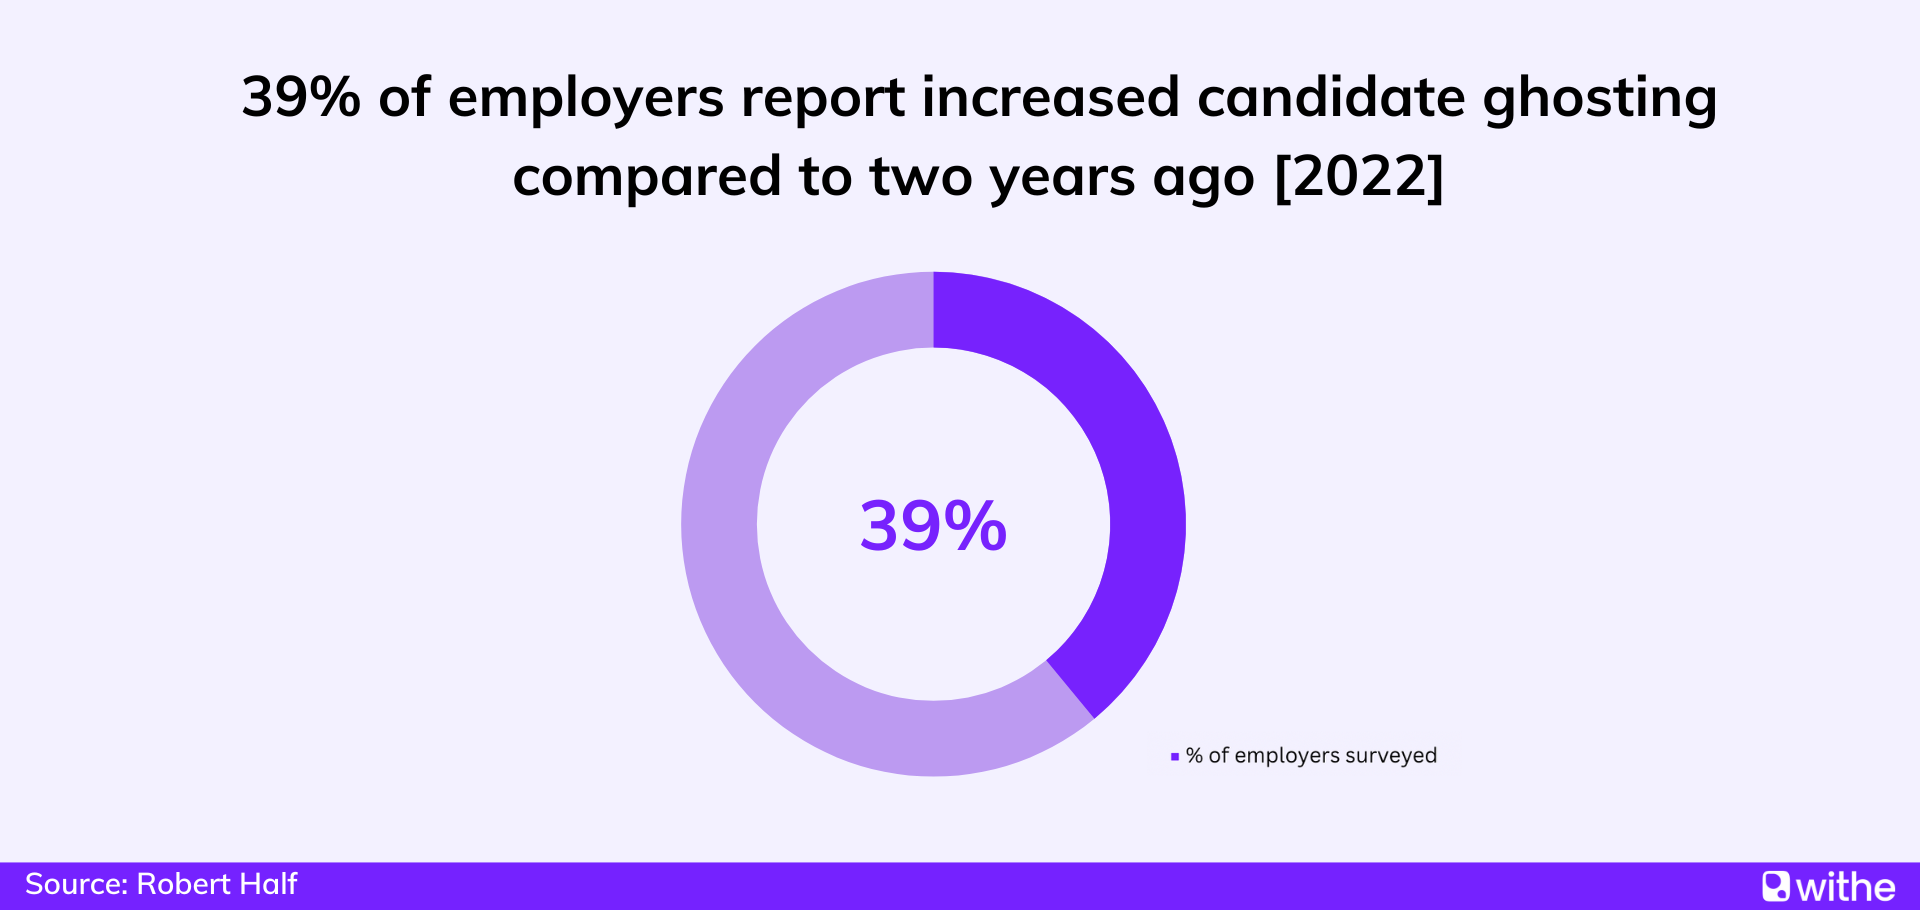 Job interview statistics - In 2022, 39% of employers report increased candidate ghosting compared to 2020